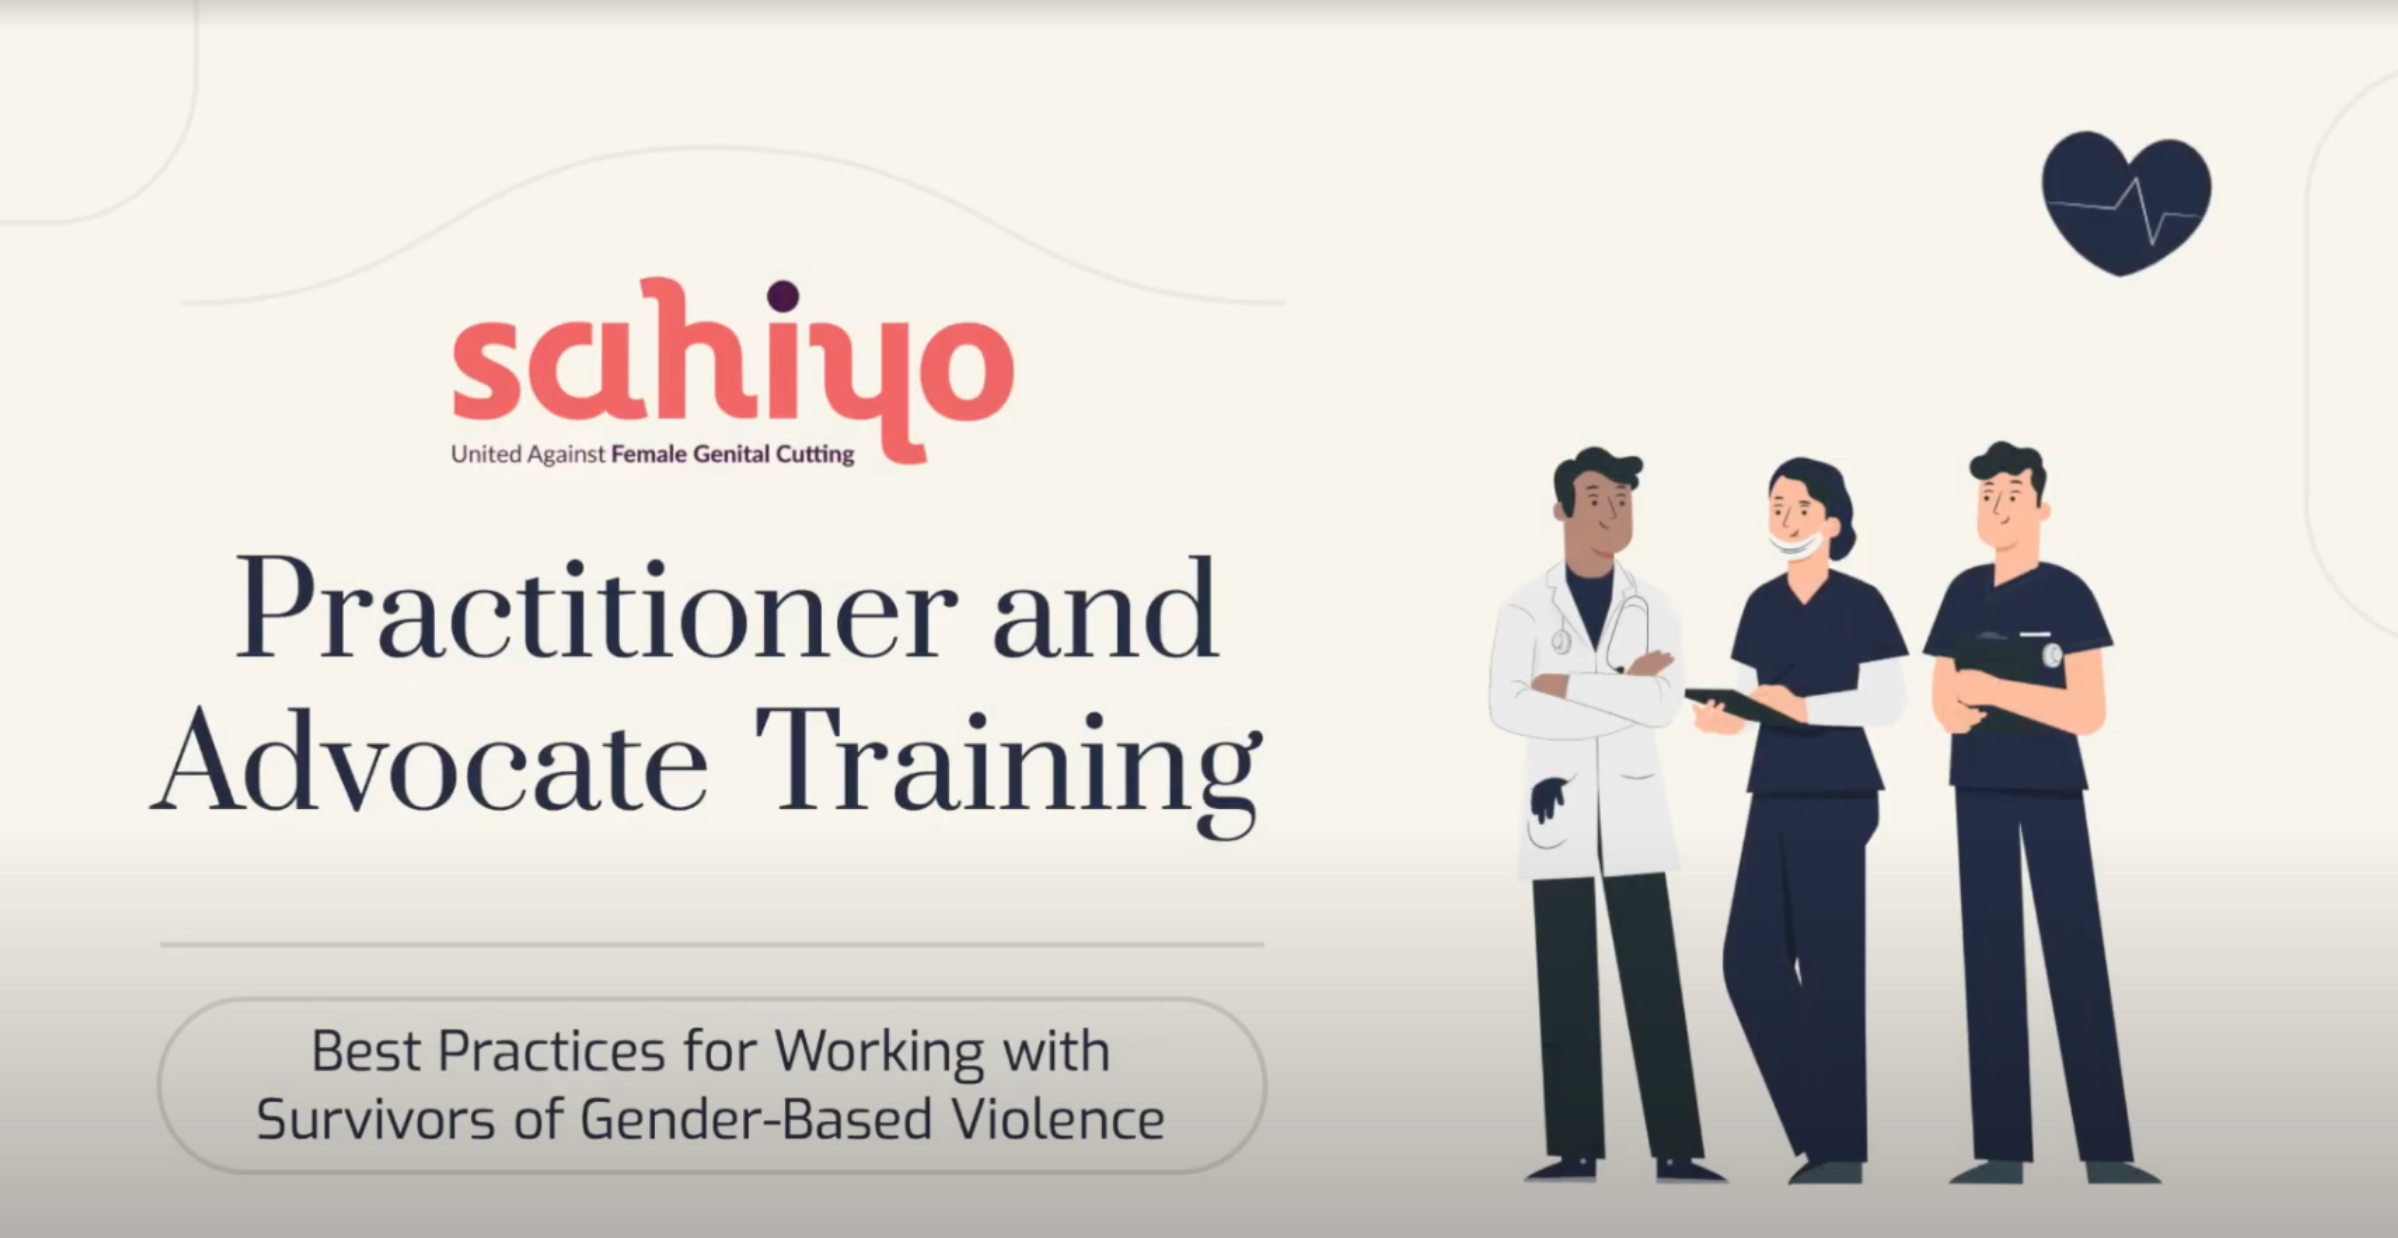 Practitioner and advocate training: Best practices for working with survivors of gender-based violence